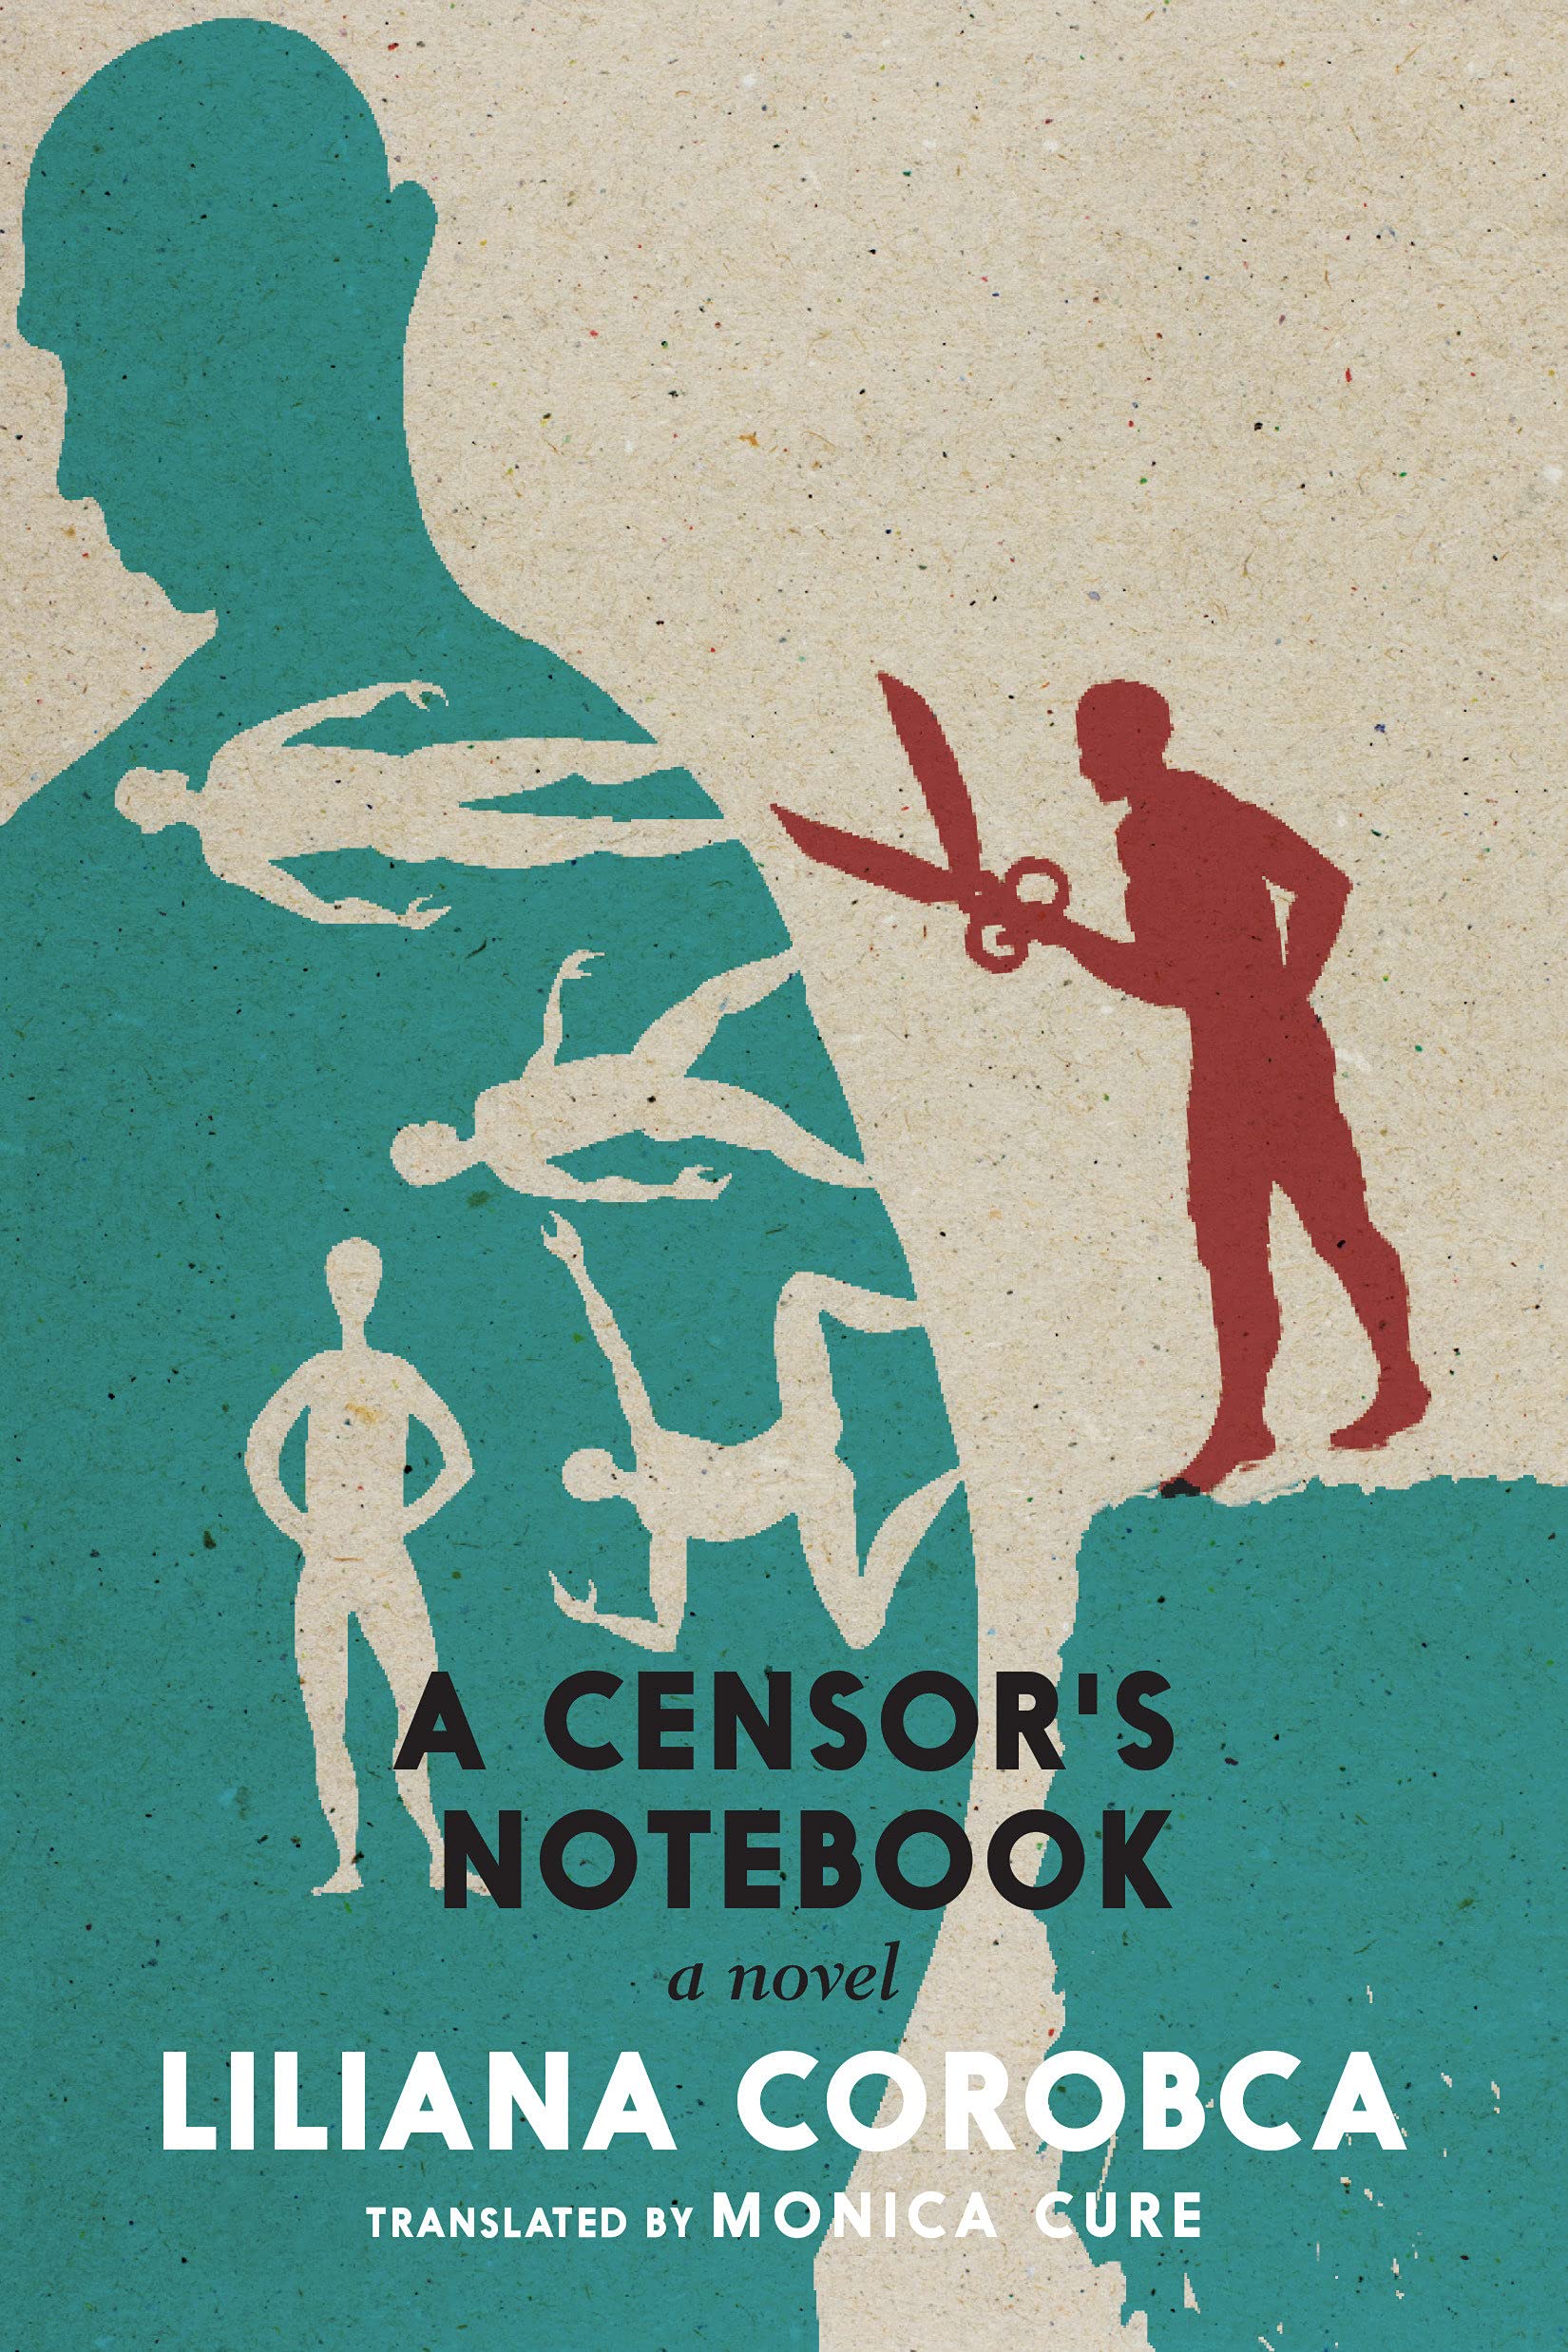 The Censor’s Notebook